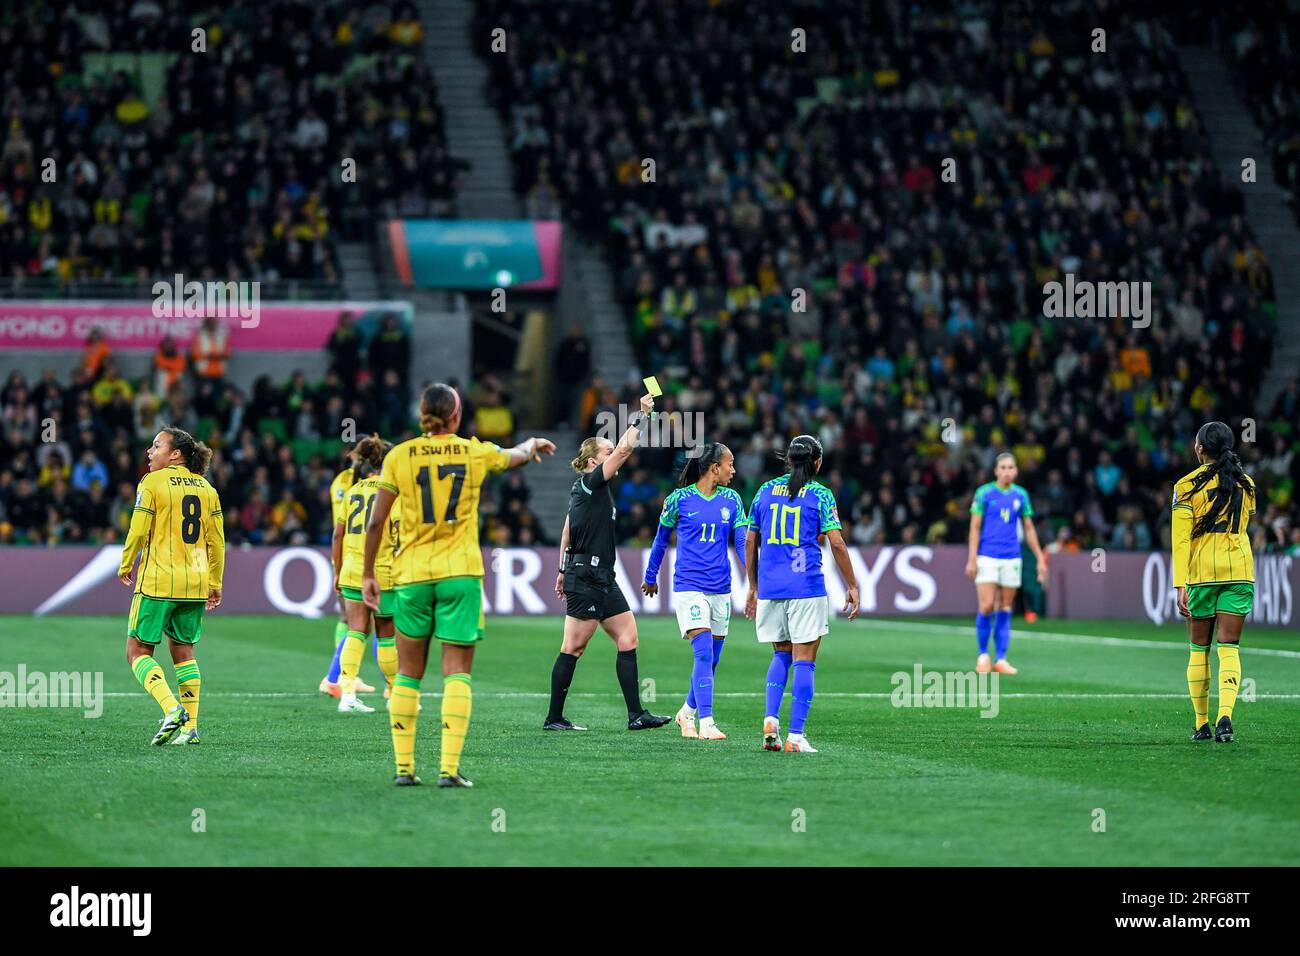 Referee Esther Staubli seen giving a yellow card during the FIFA Women's World Cup 2023 Group match between Brazil and Jamaica at the Melbourne Rectangular Stadium. Final score Brazil 0:0 Jamaica. (Photo by Alexander Bogatyrev / SOPA Image/Sipa USA) Stock Photo